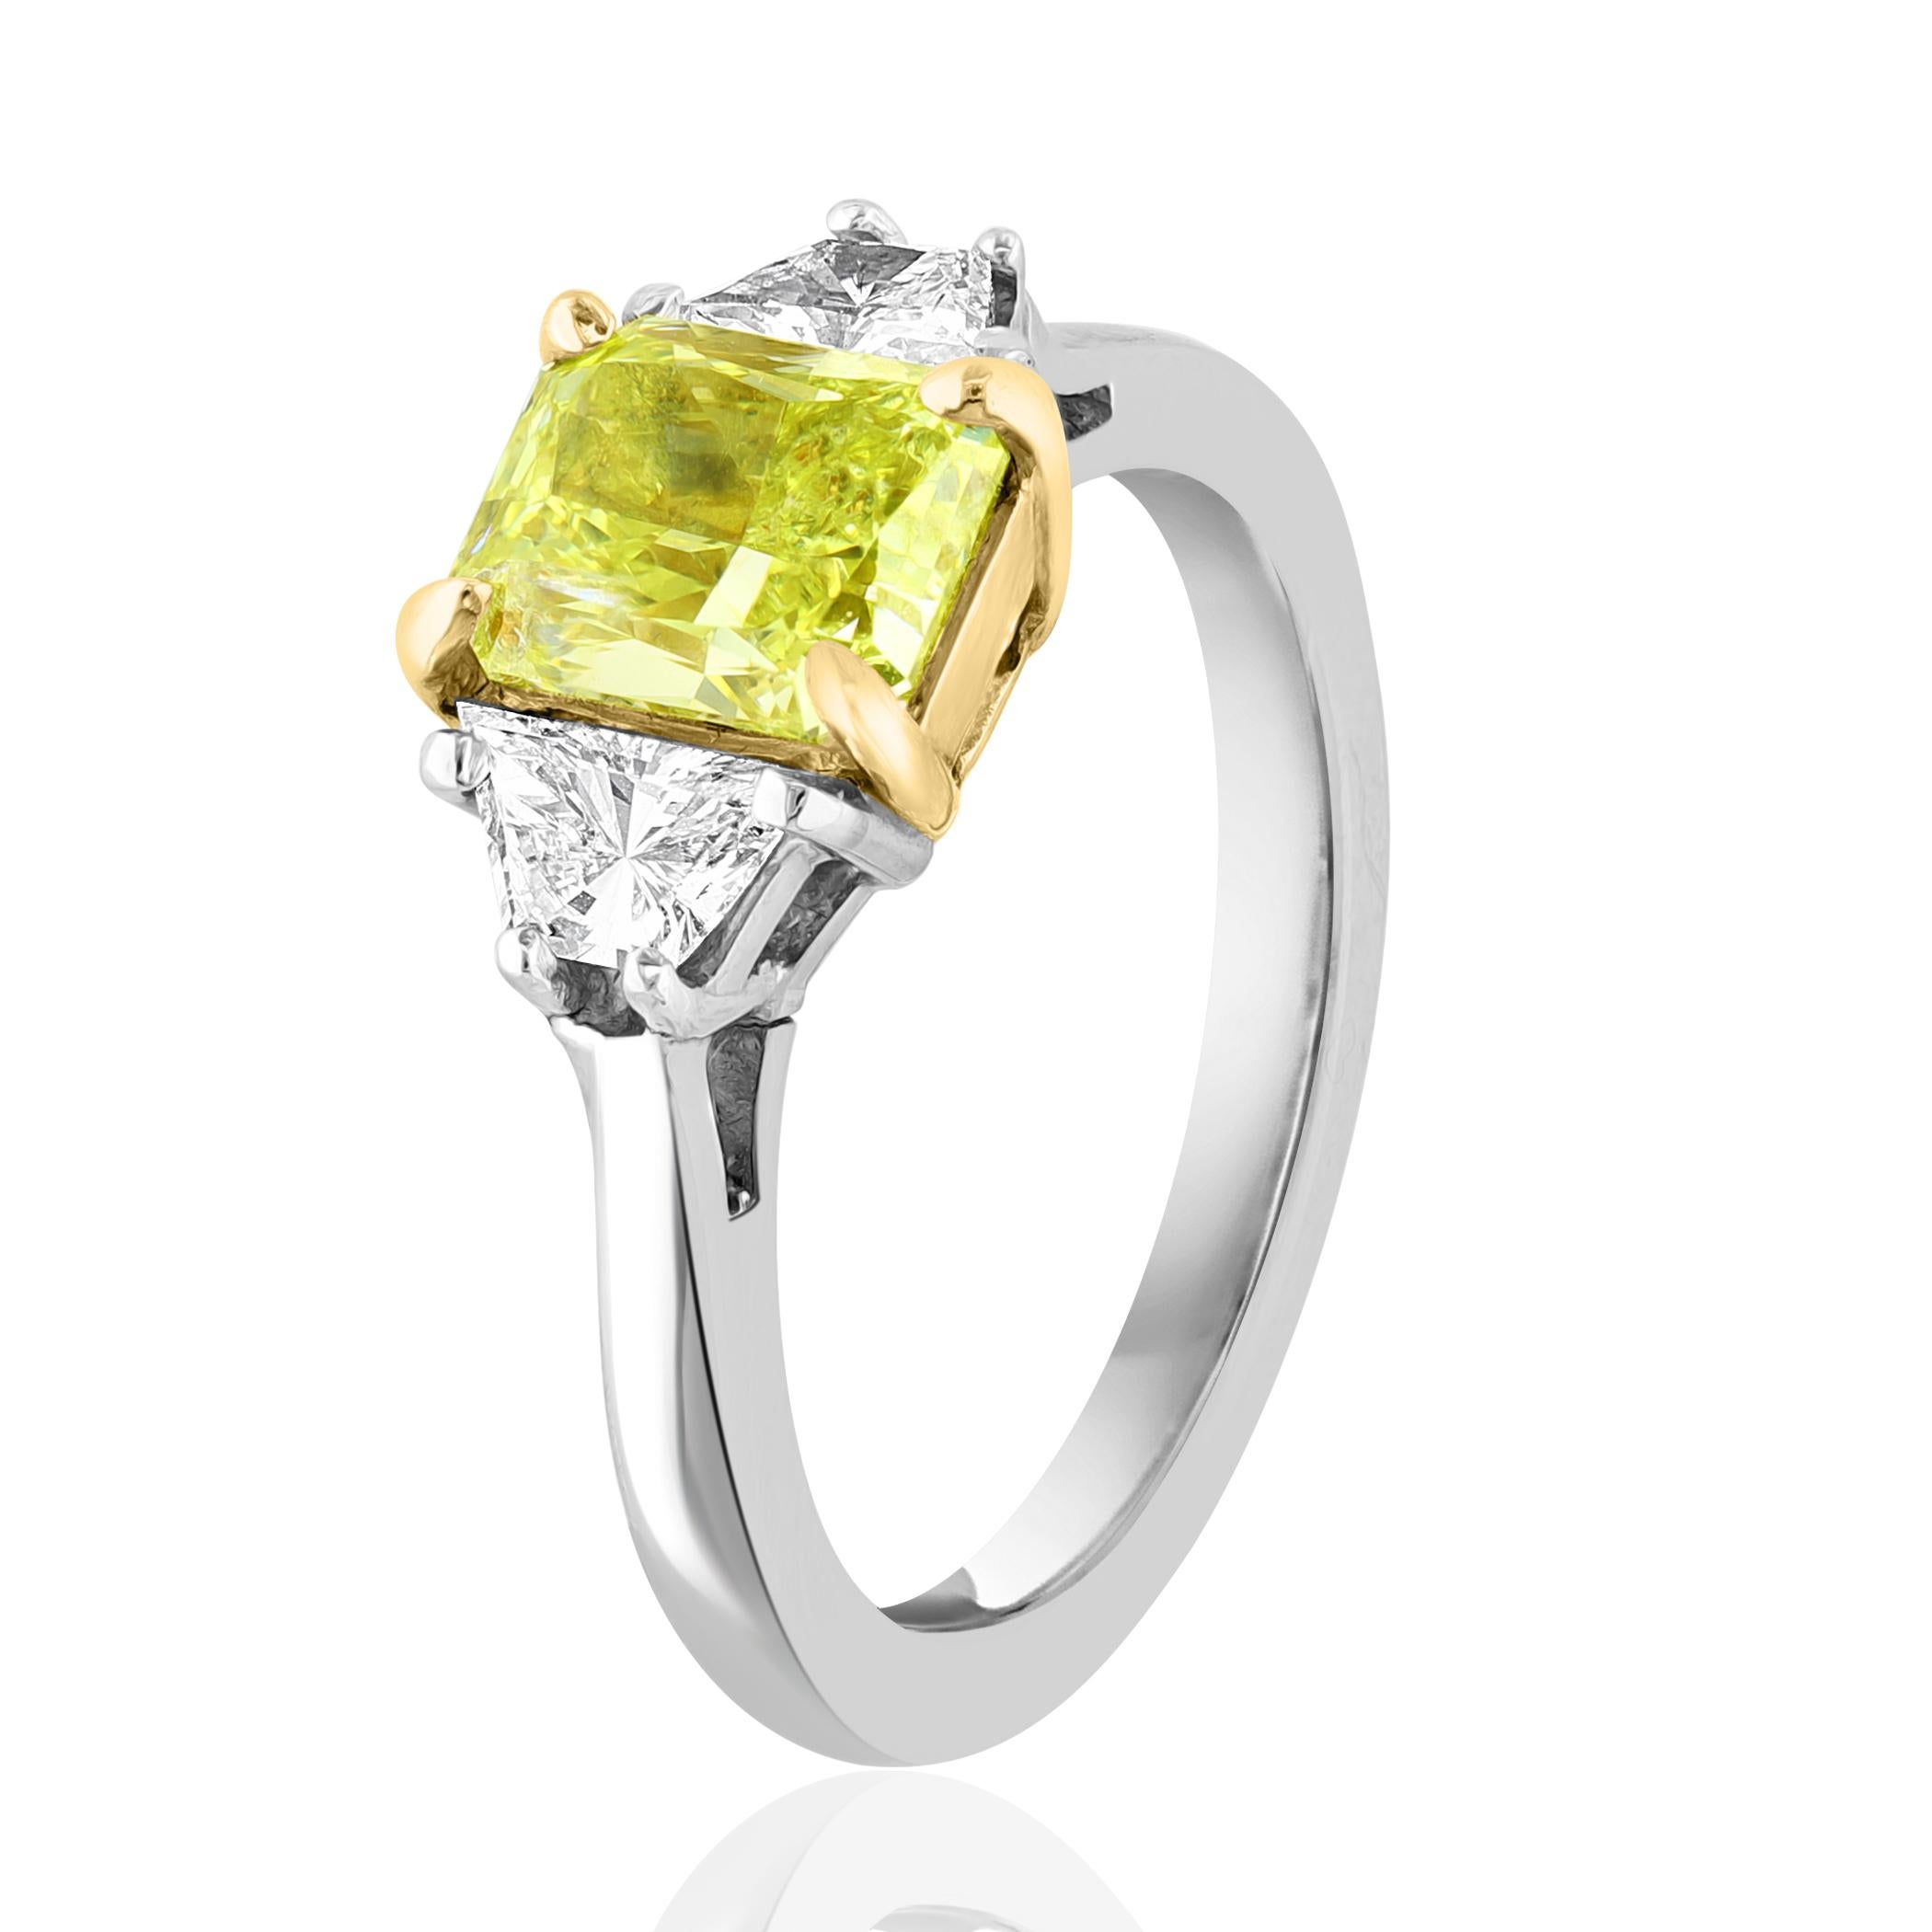 Showcasing Certified Emerald cut, Fancy Intense color Yellow Diamond weighing 1.06 carat, flanked by two brilliant cut trapezoids diamonds weighing 0.49 carats total. Elegantly set in a polished platinum composition.